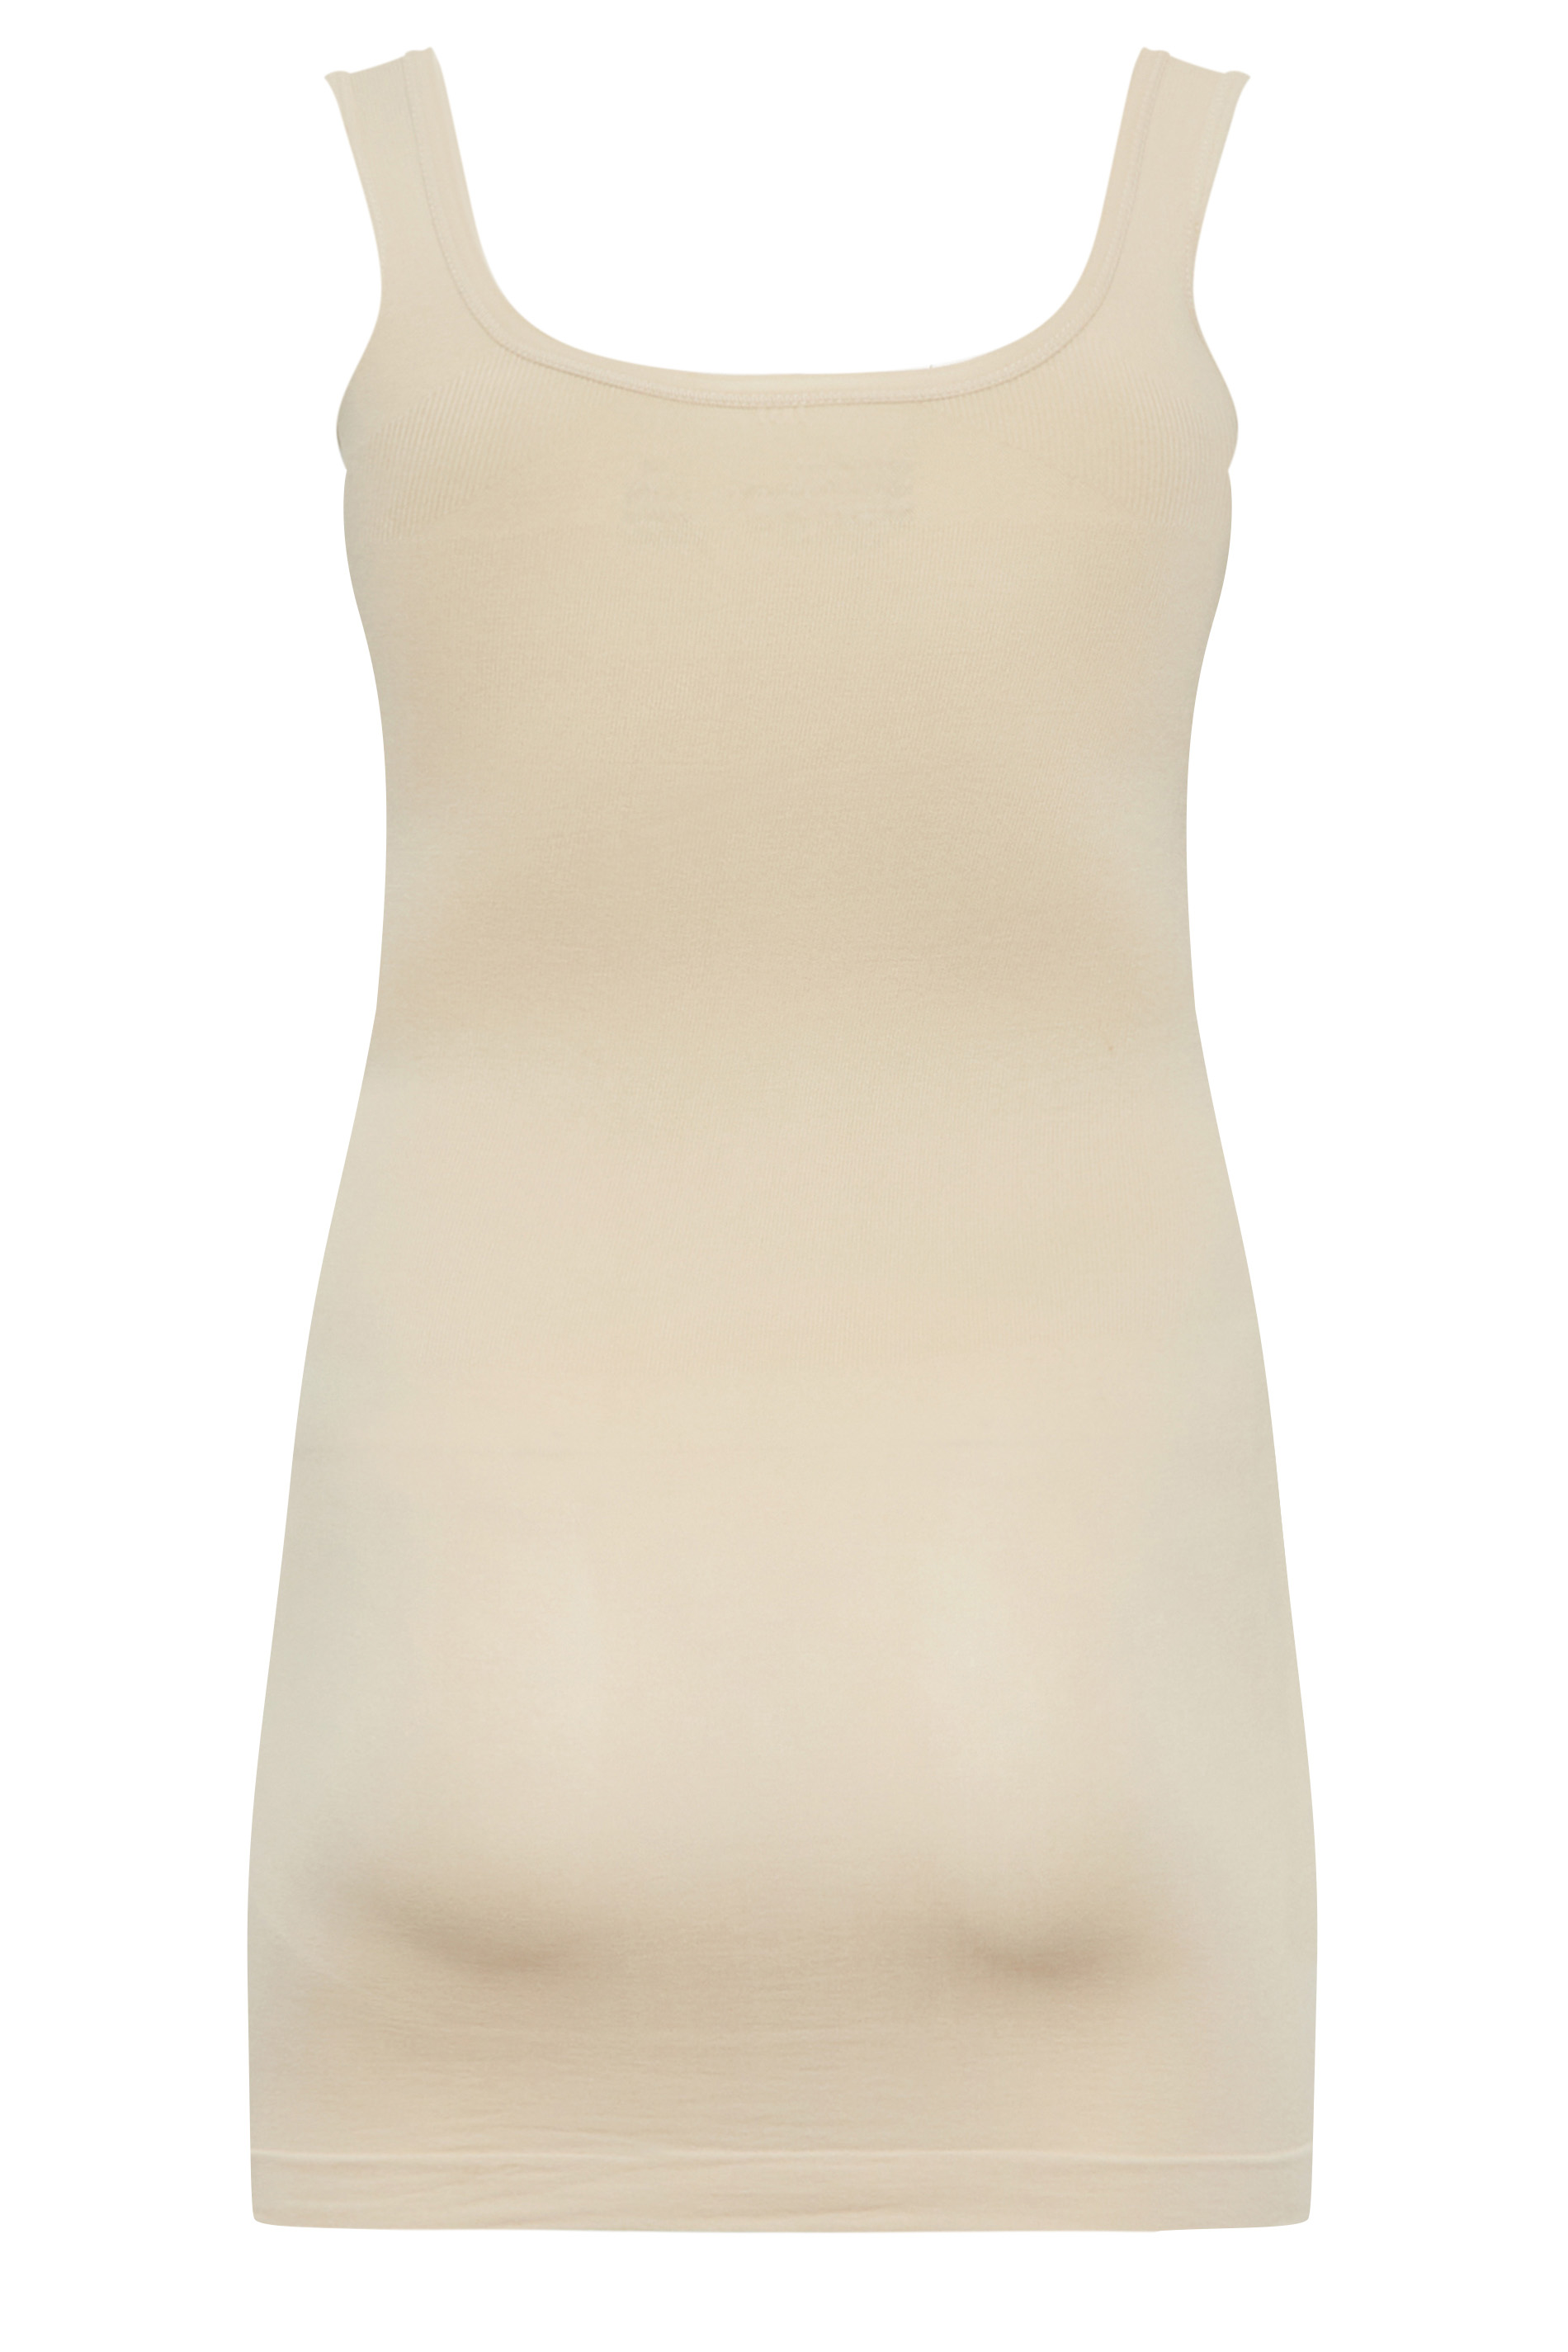 Plus Size Nude Seamless Control Underbra Slip Dress | Yours Clothing 3